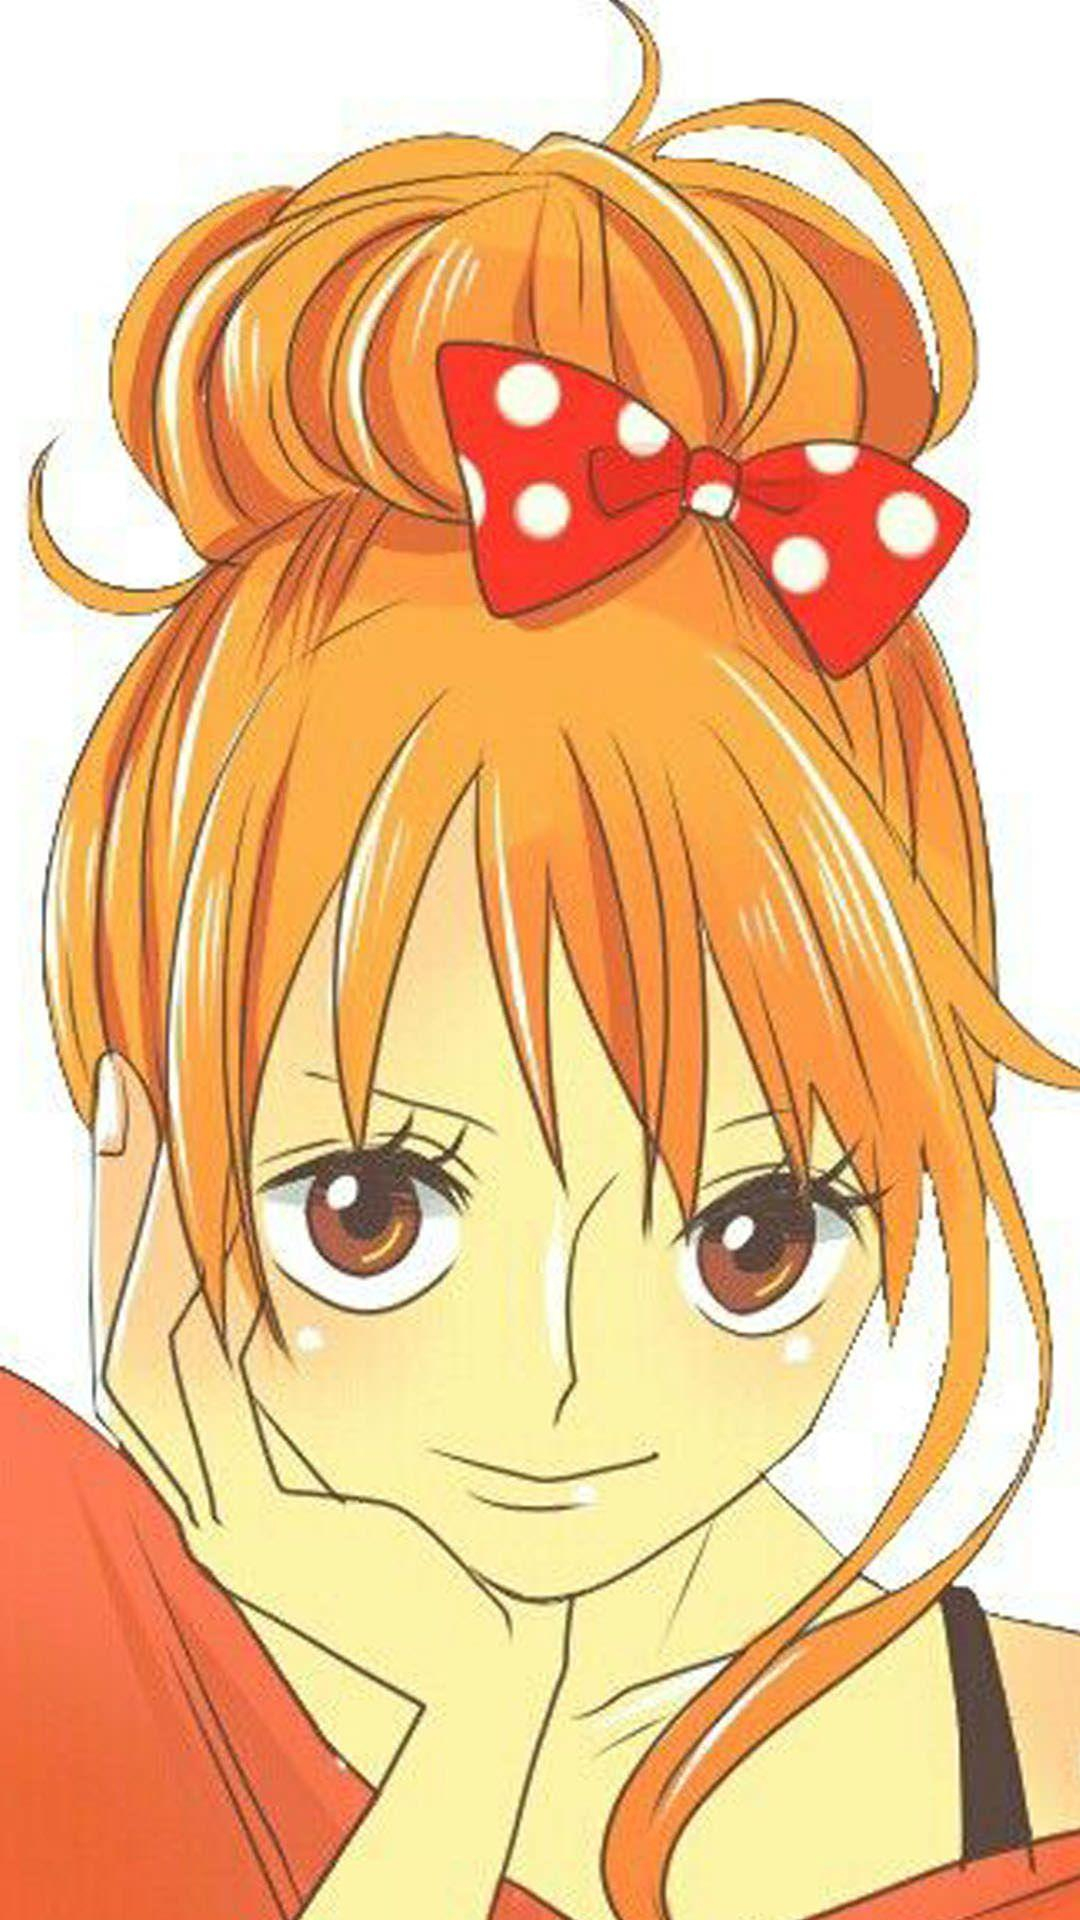 1080x1920 One Piece Nami Wallpapers